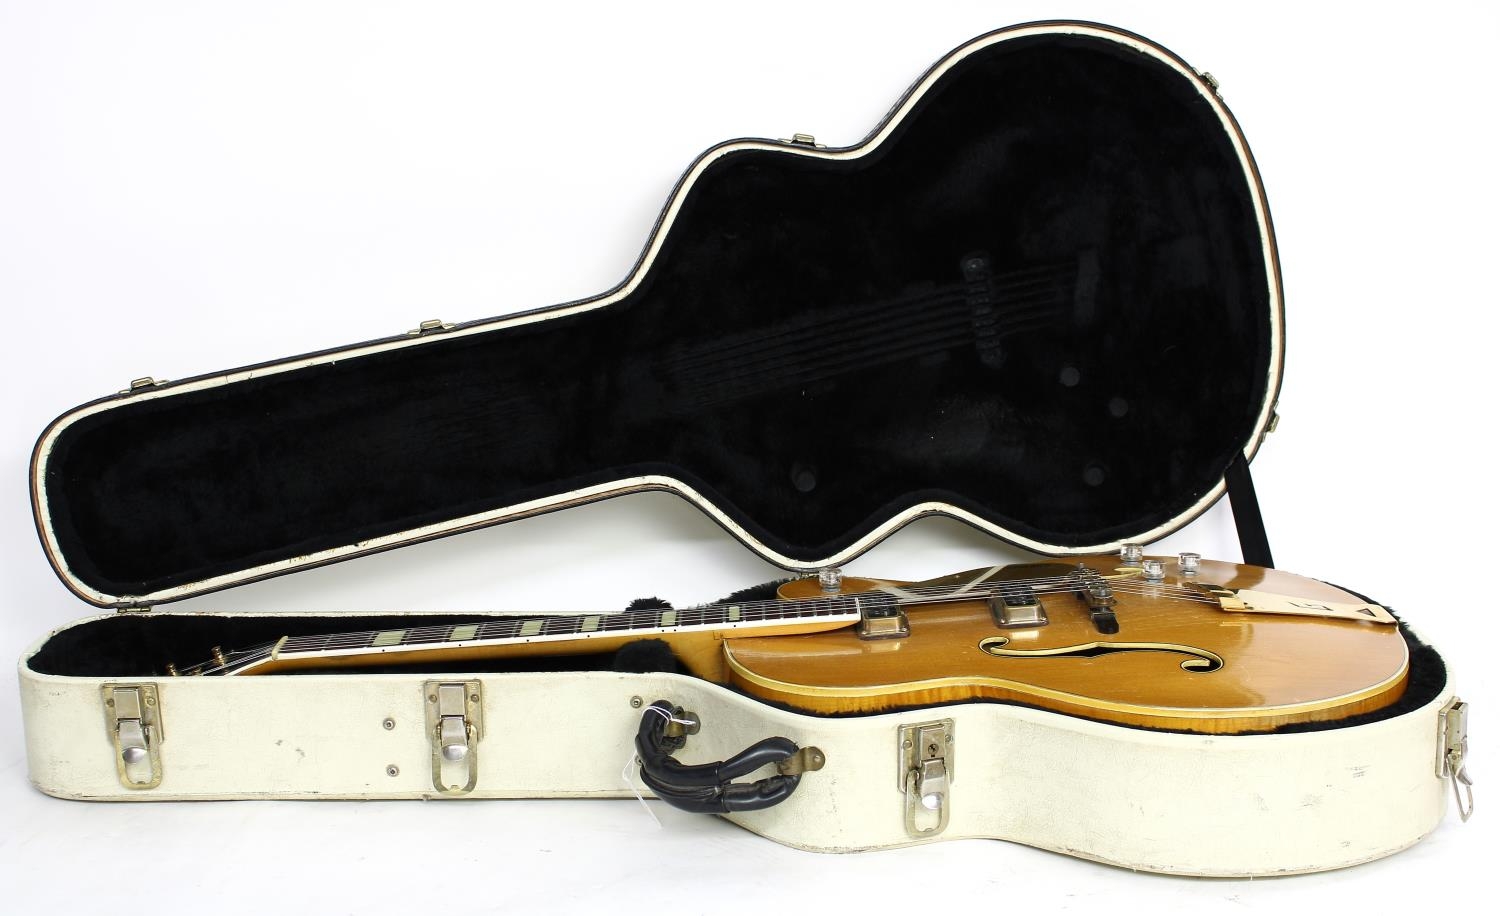 Gretsch Electro II 6193 (Country Club) hollow body electric guitar, made in USA, circa 1953, ser. - Image 5 of 5